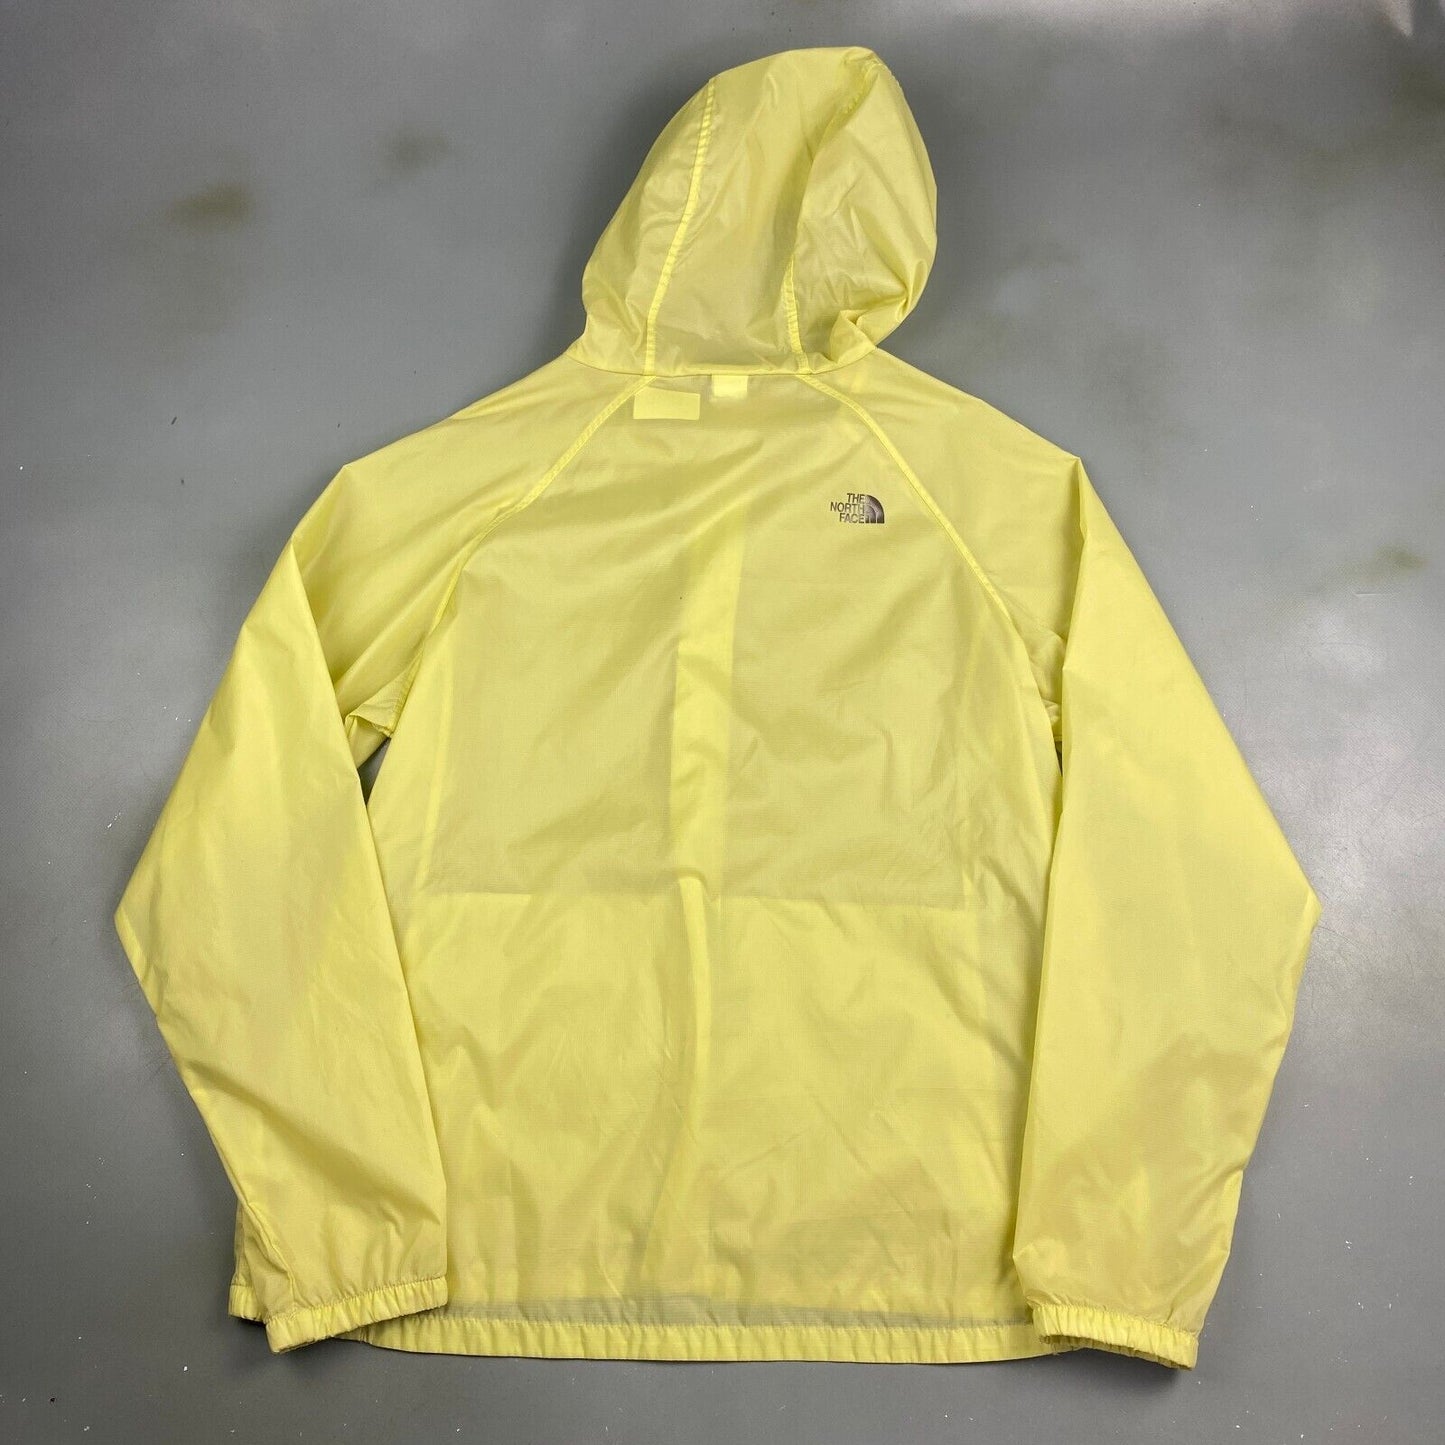 VINTAGE The North Face Thin Yellow Shell Windbreaker Jacket sz XL Adult